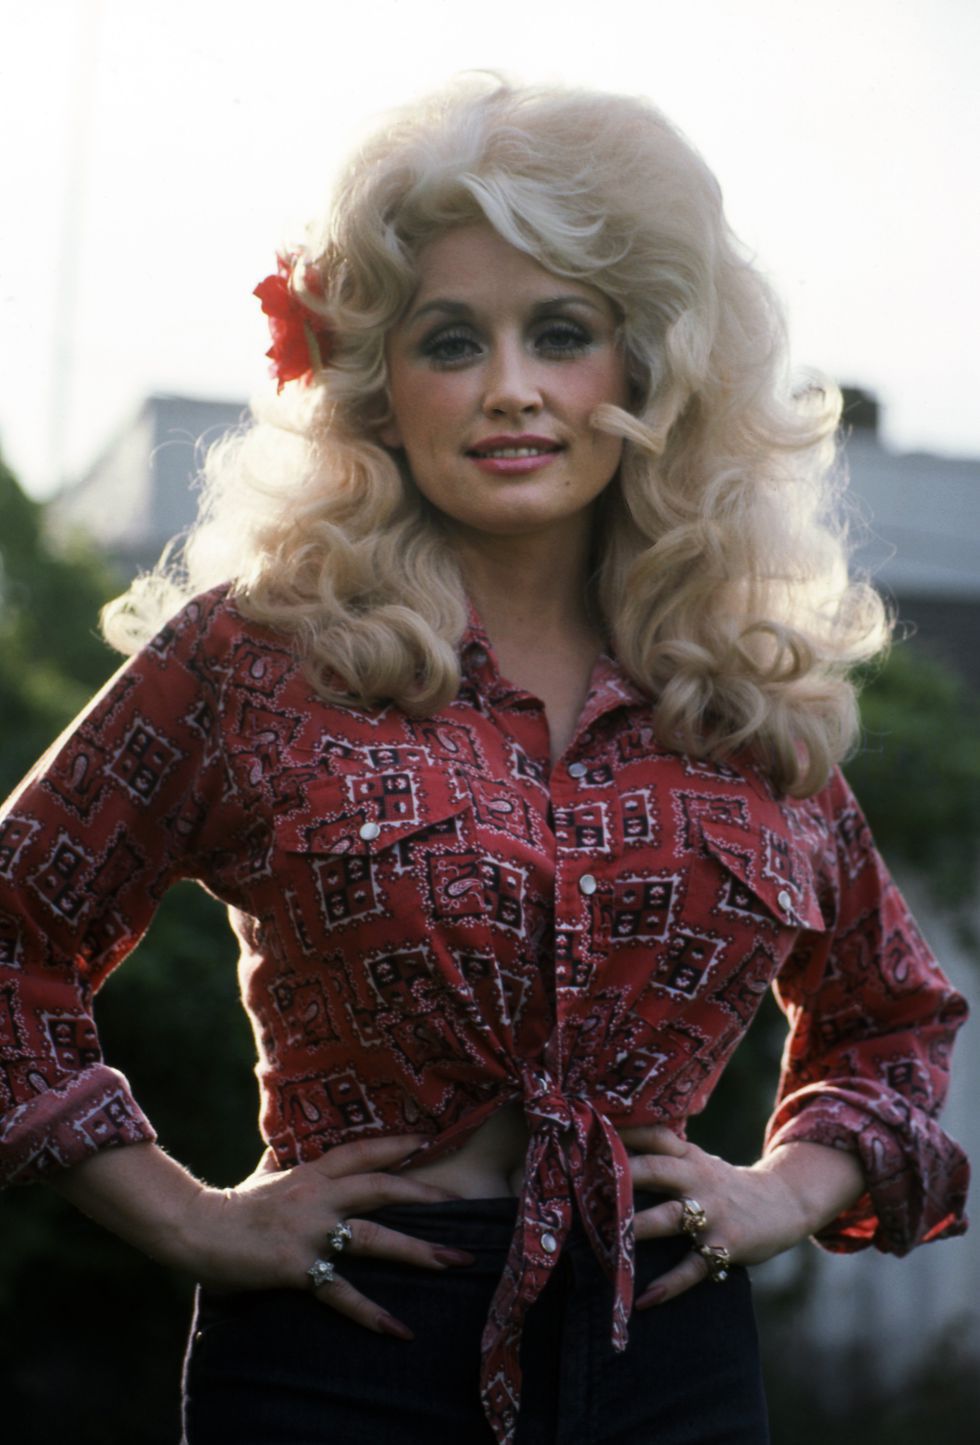 Vintage Dolly Parton interview shows she's been in on the joke this